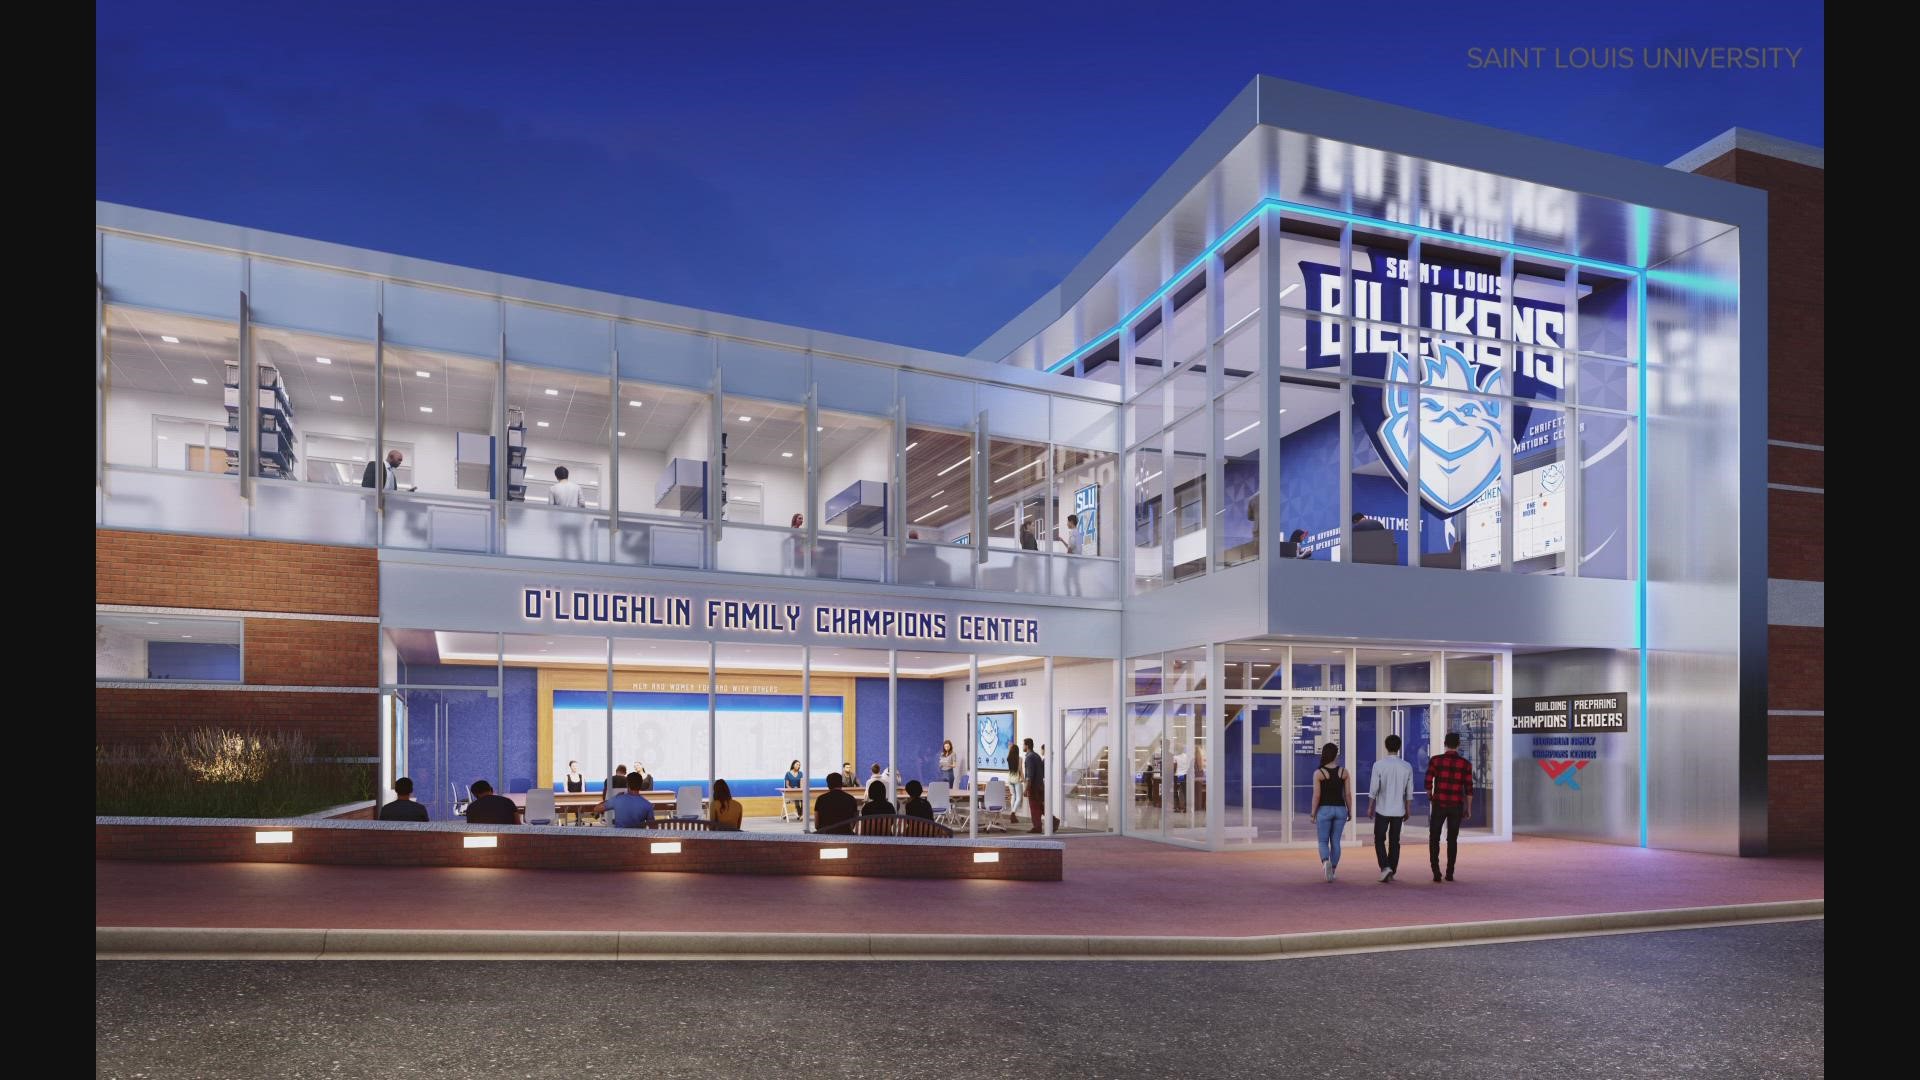 The 25,000-square-foot facility will be connected to Chaifetz Arena and impact more than 400 student-athletes.